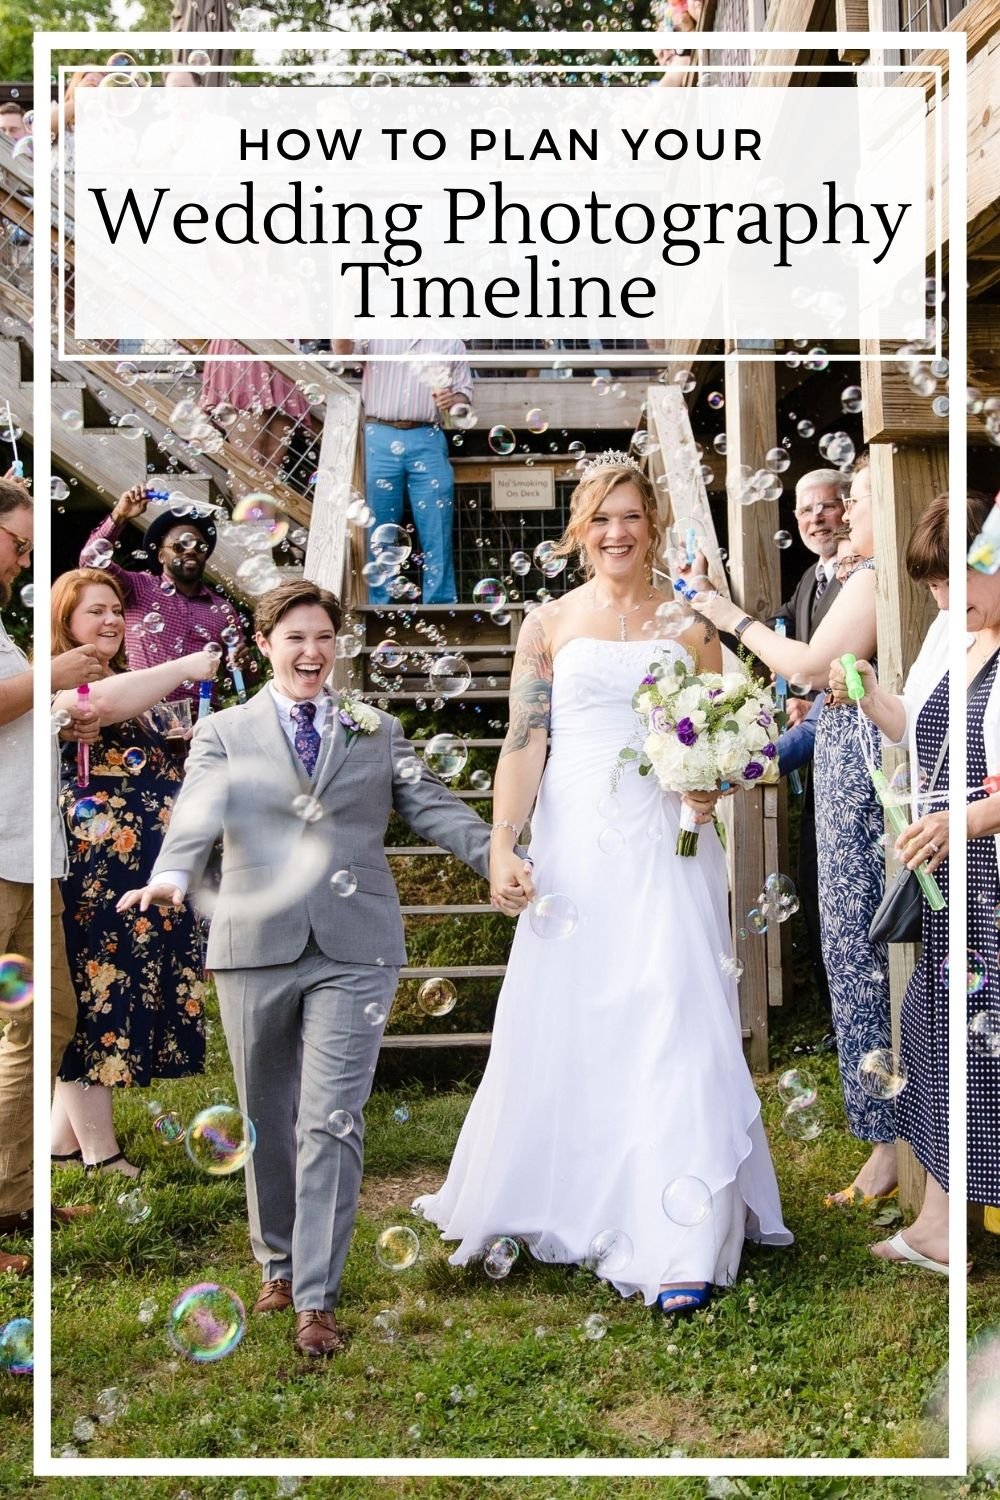 How to plan wedding photography timeline